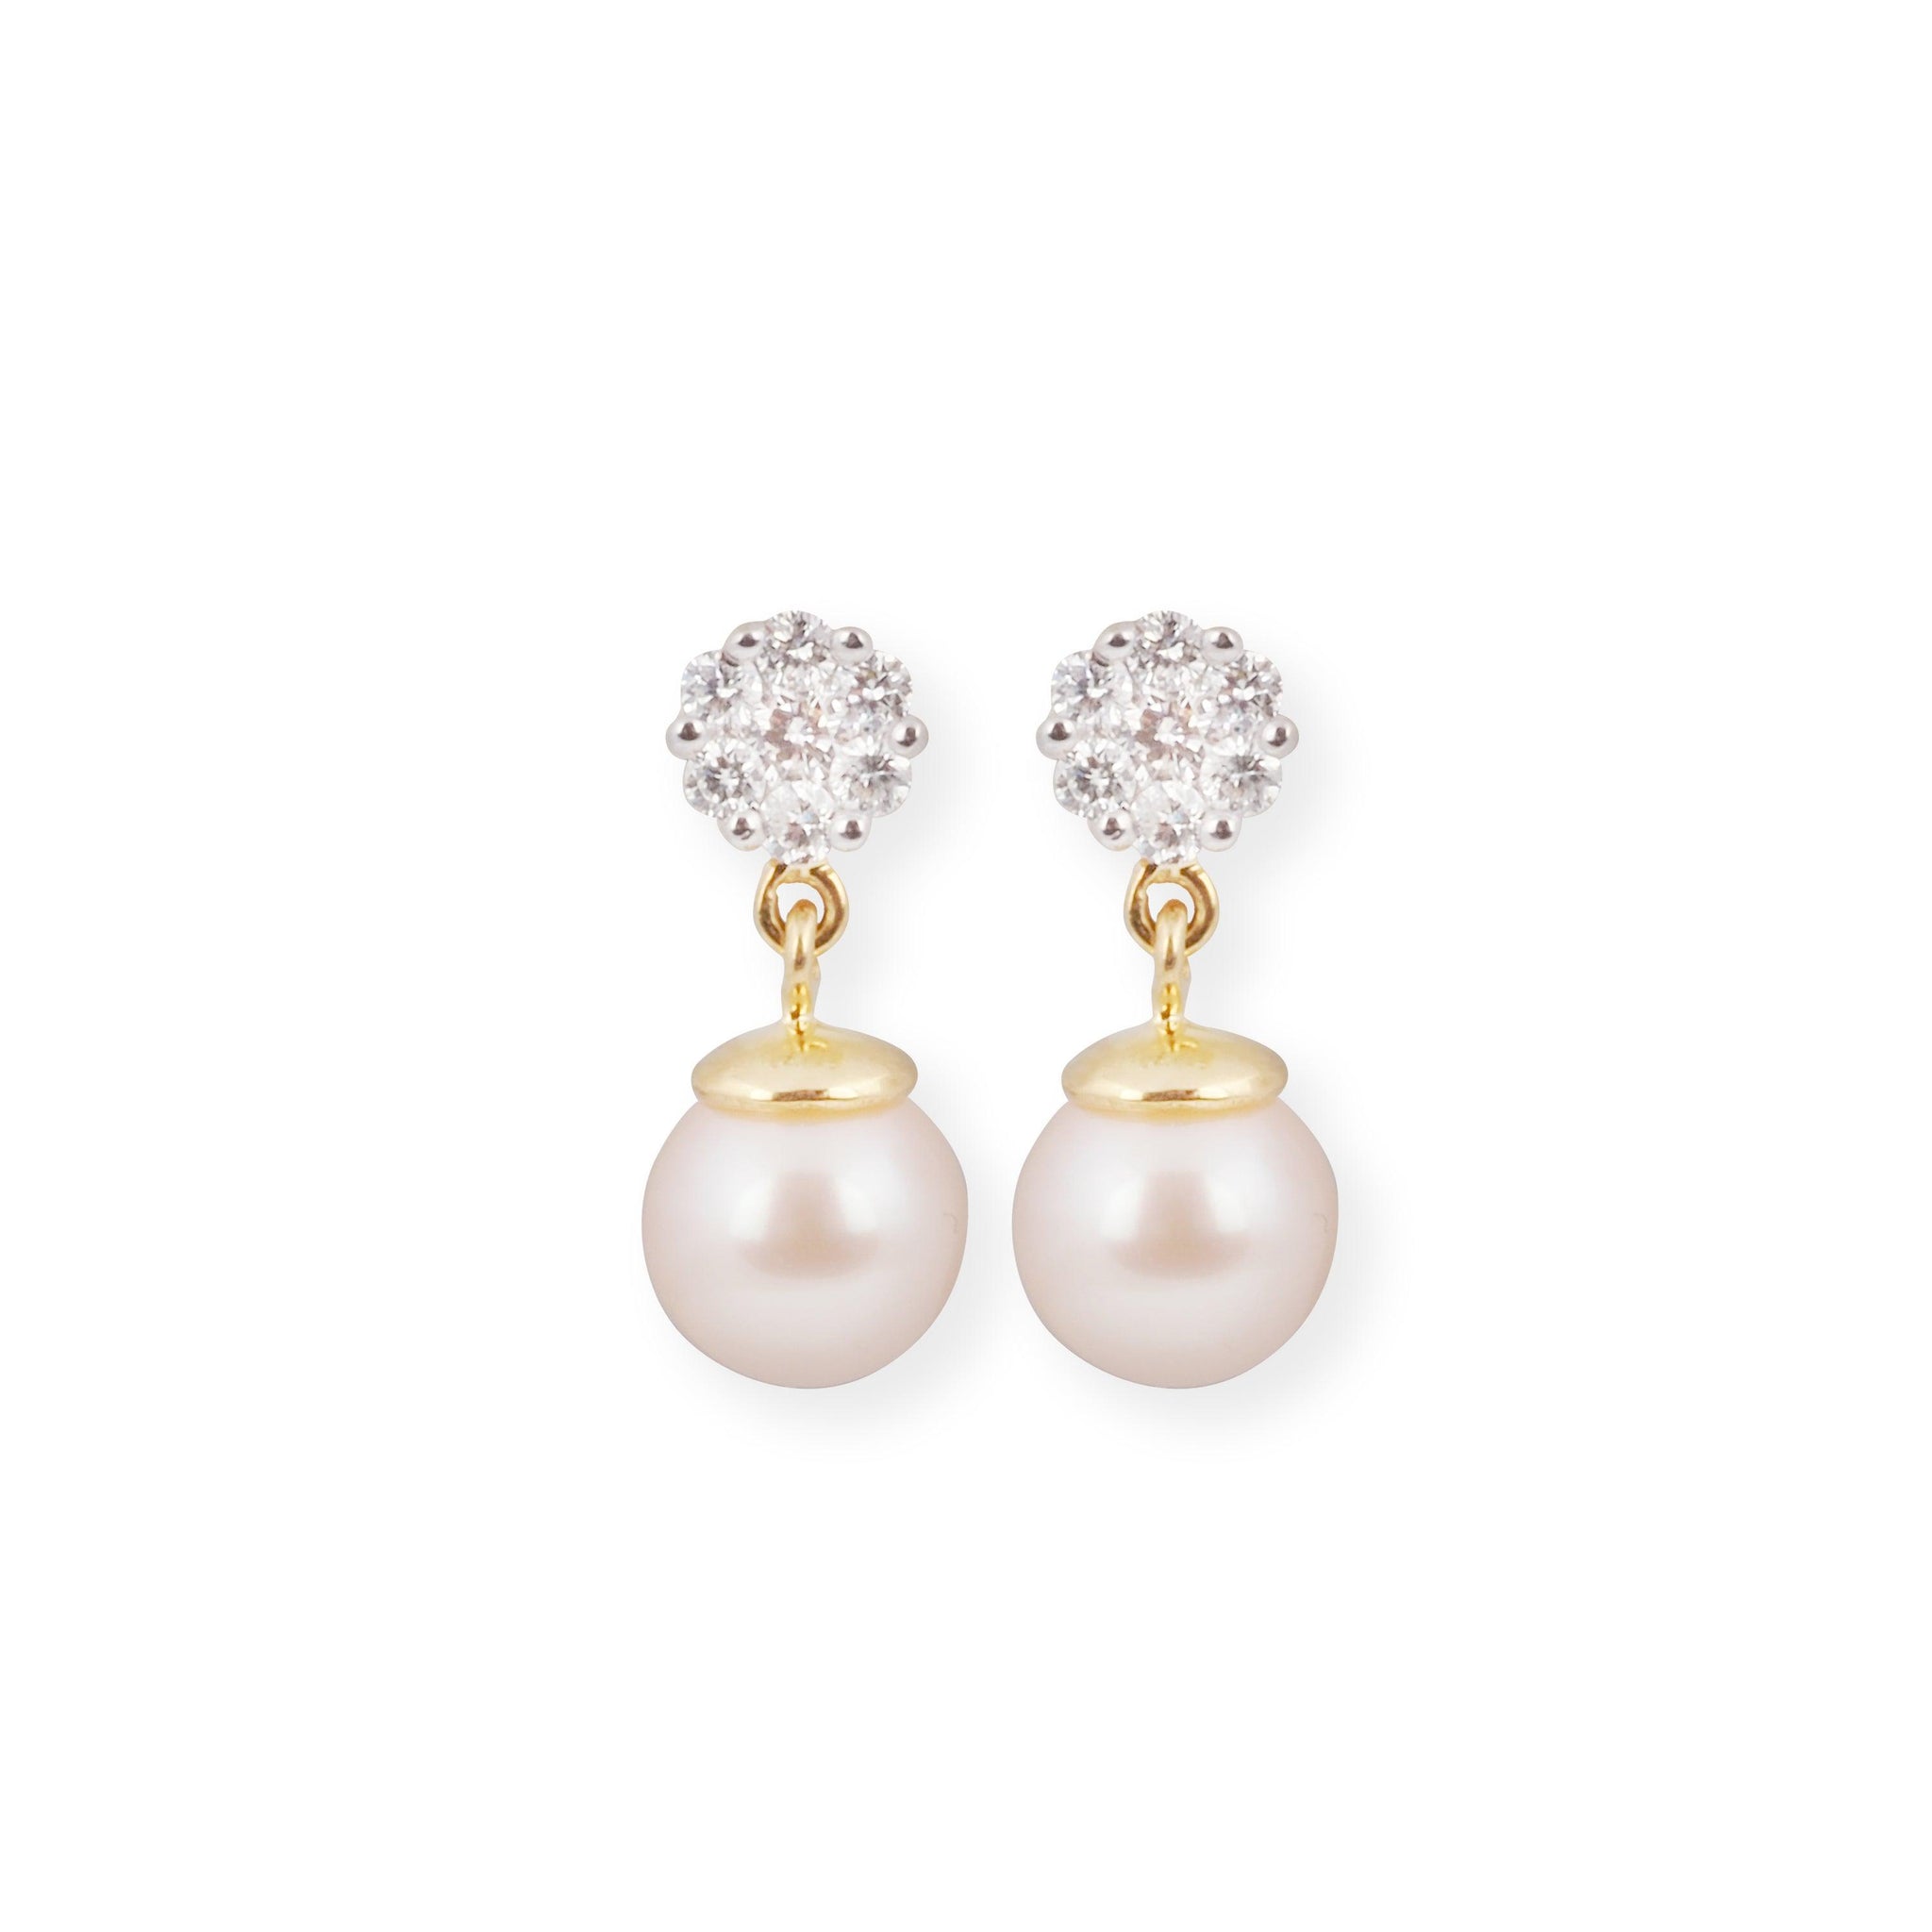 18ct Yellow Gold Diamond Earrings with Cultured Pearl Drop and Screw Back MCS6297